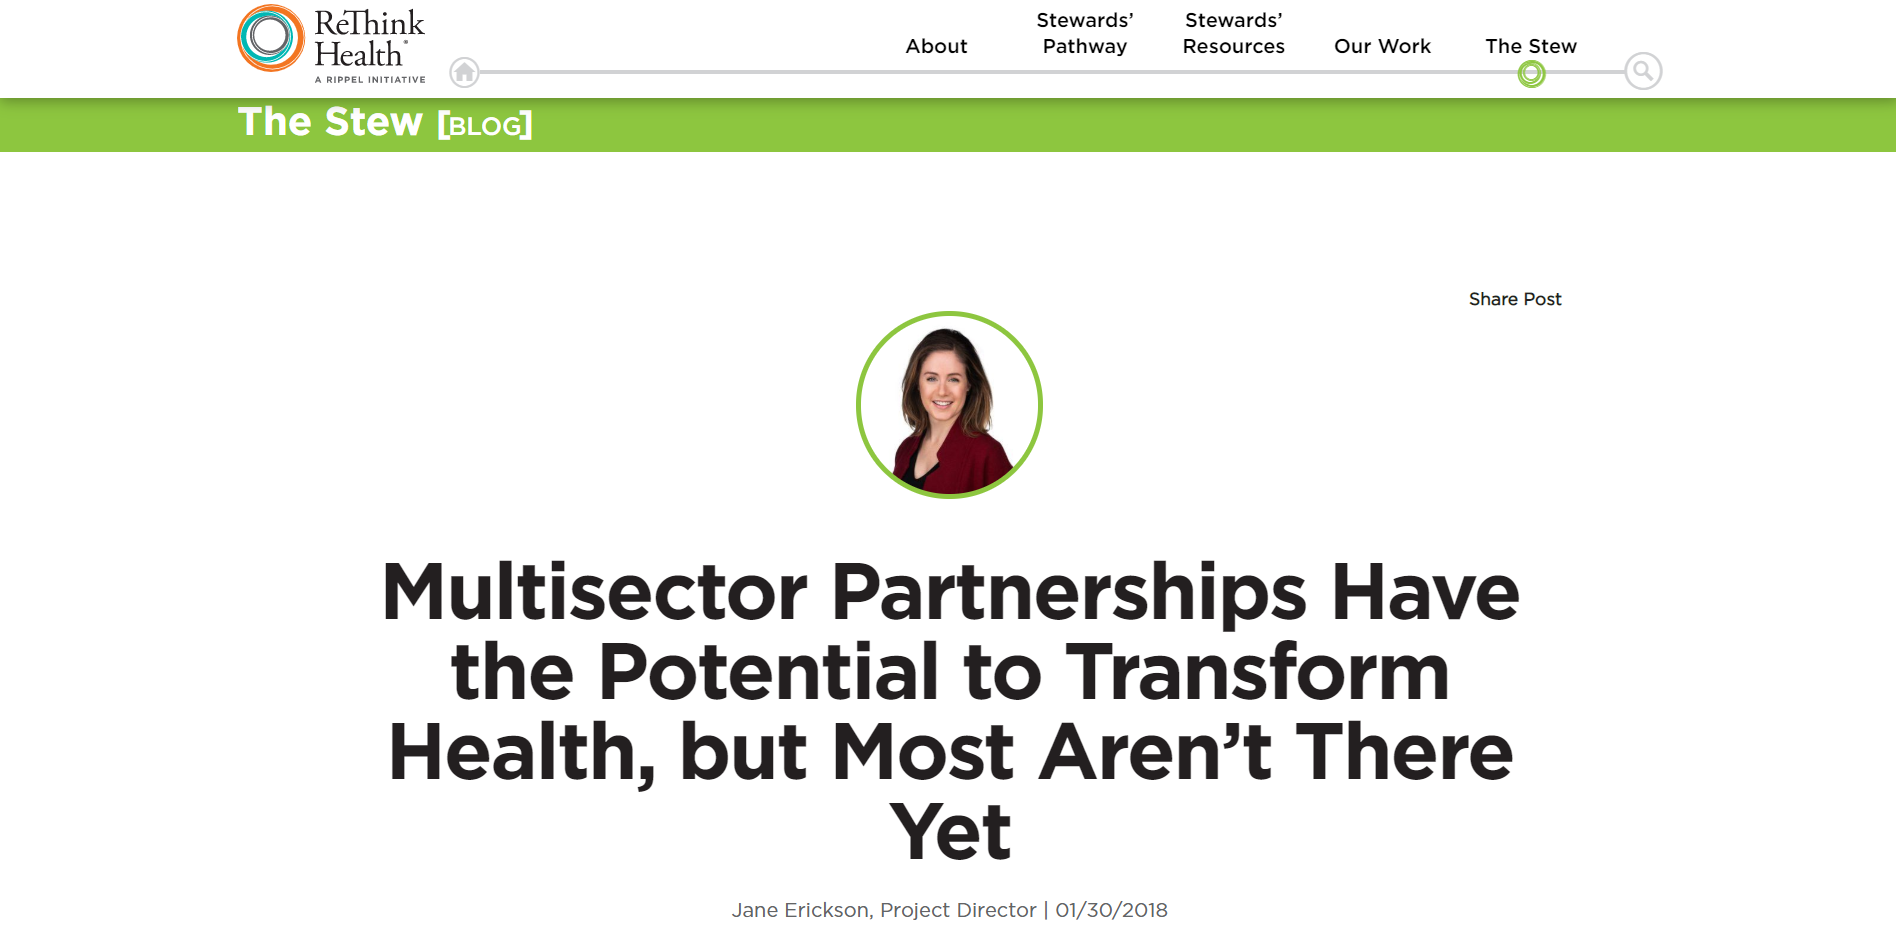 Multisector Partnerships Have the Potential to Transform Health, but Most Aren’t There Yet